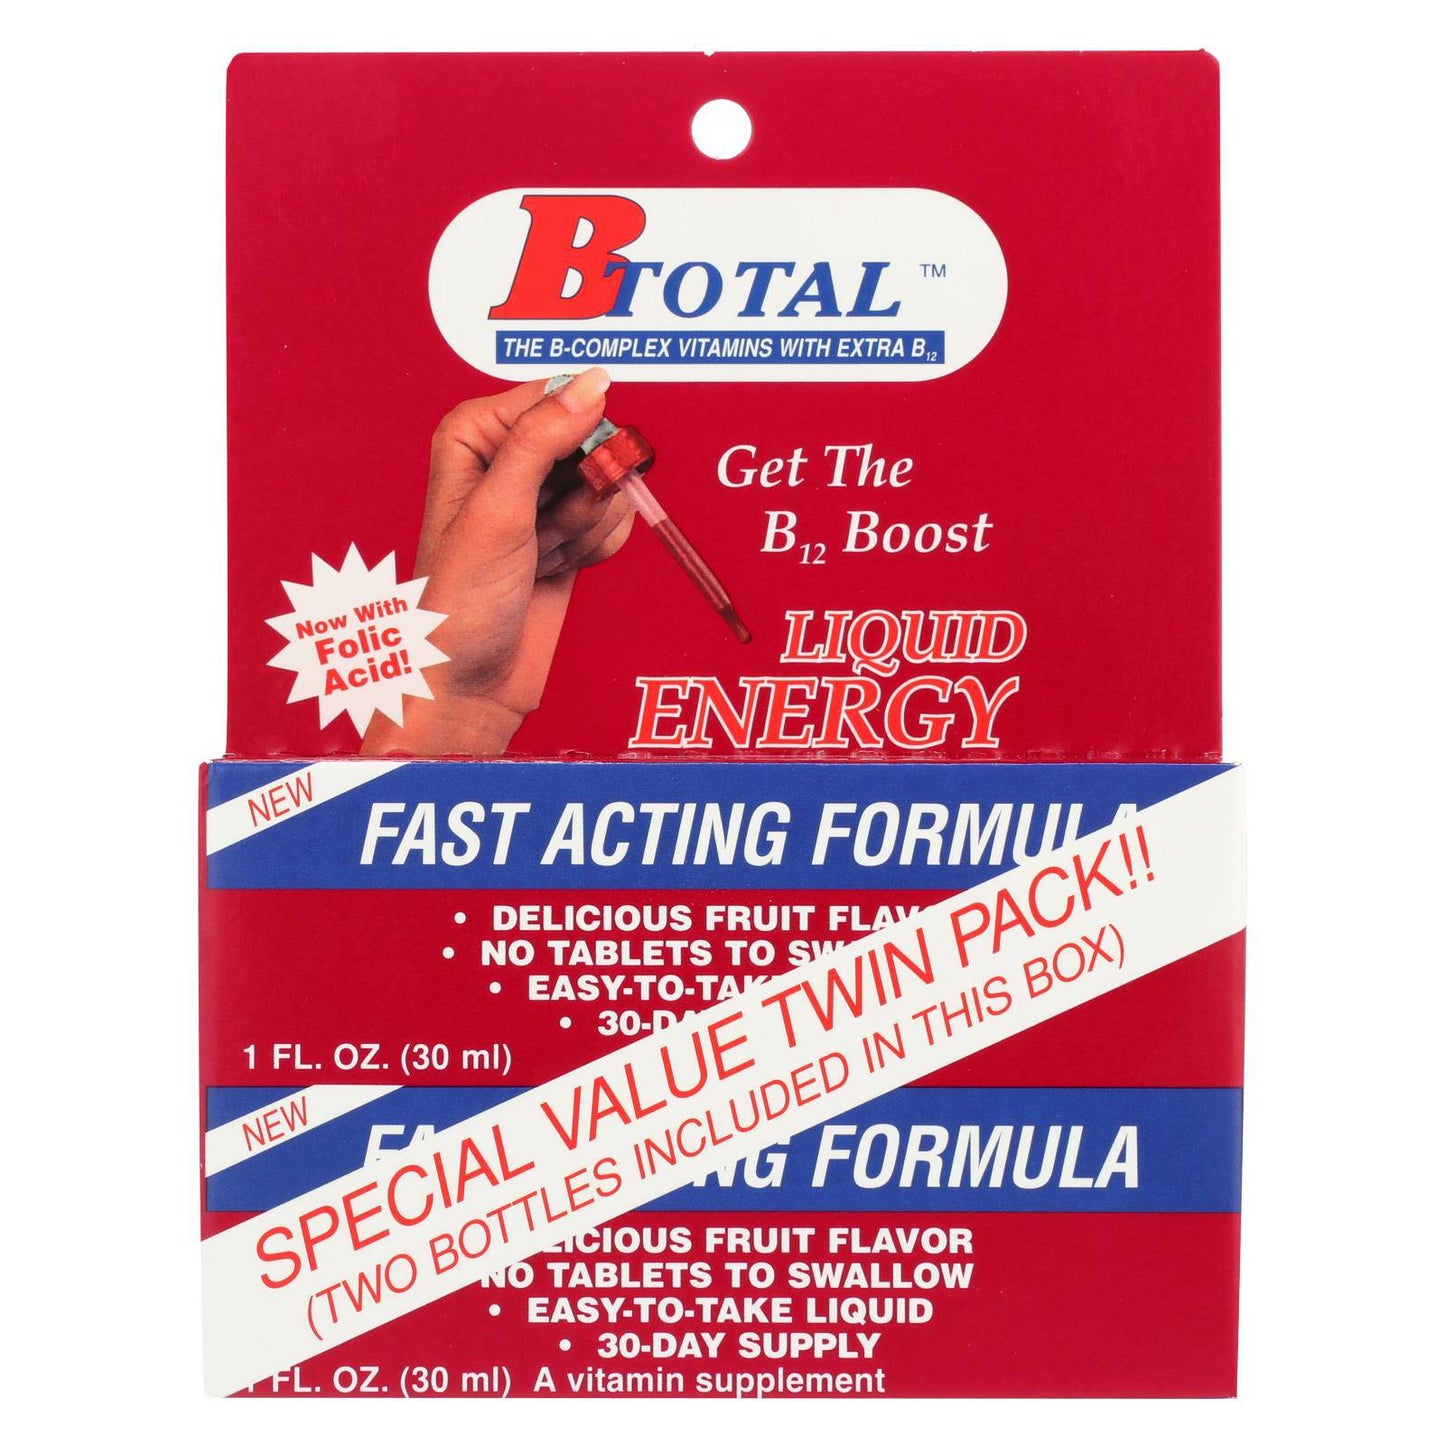 Sublingual Products B-total Twin Pack - 2 Fl Oz | OnlyNaturals.us